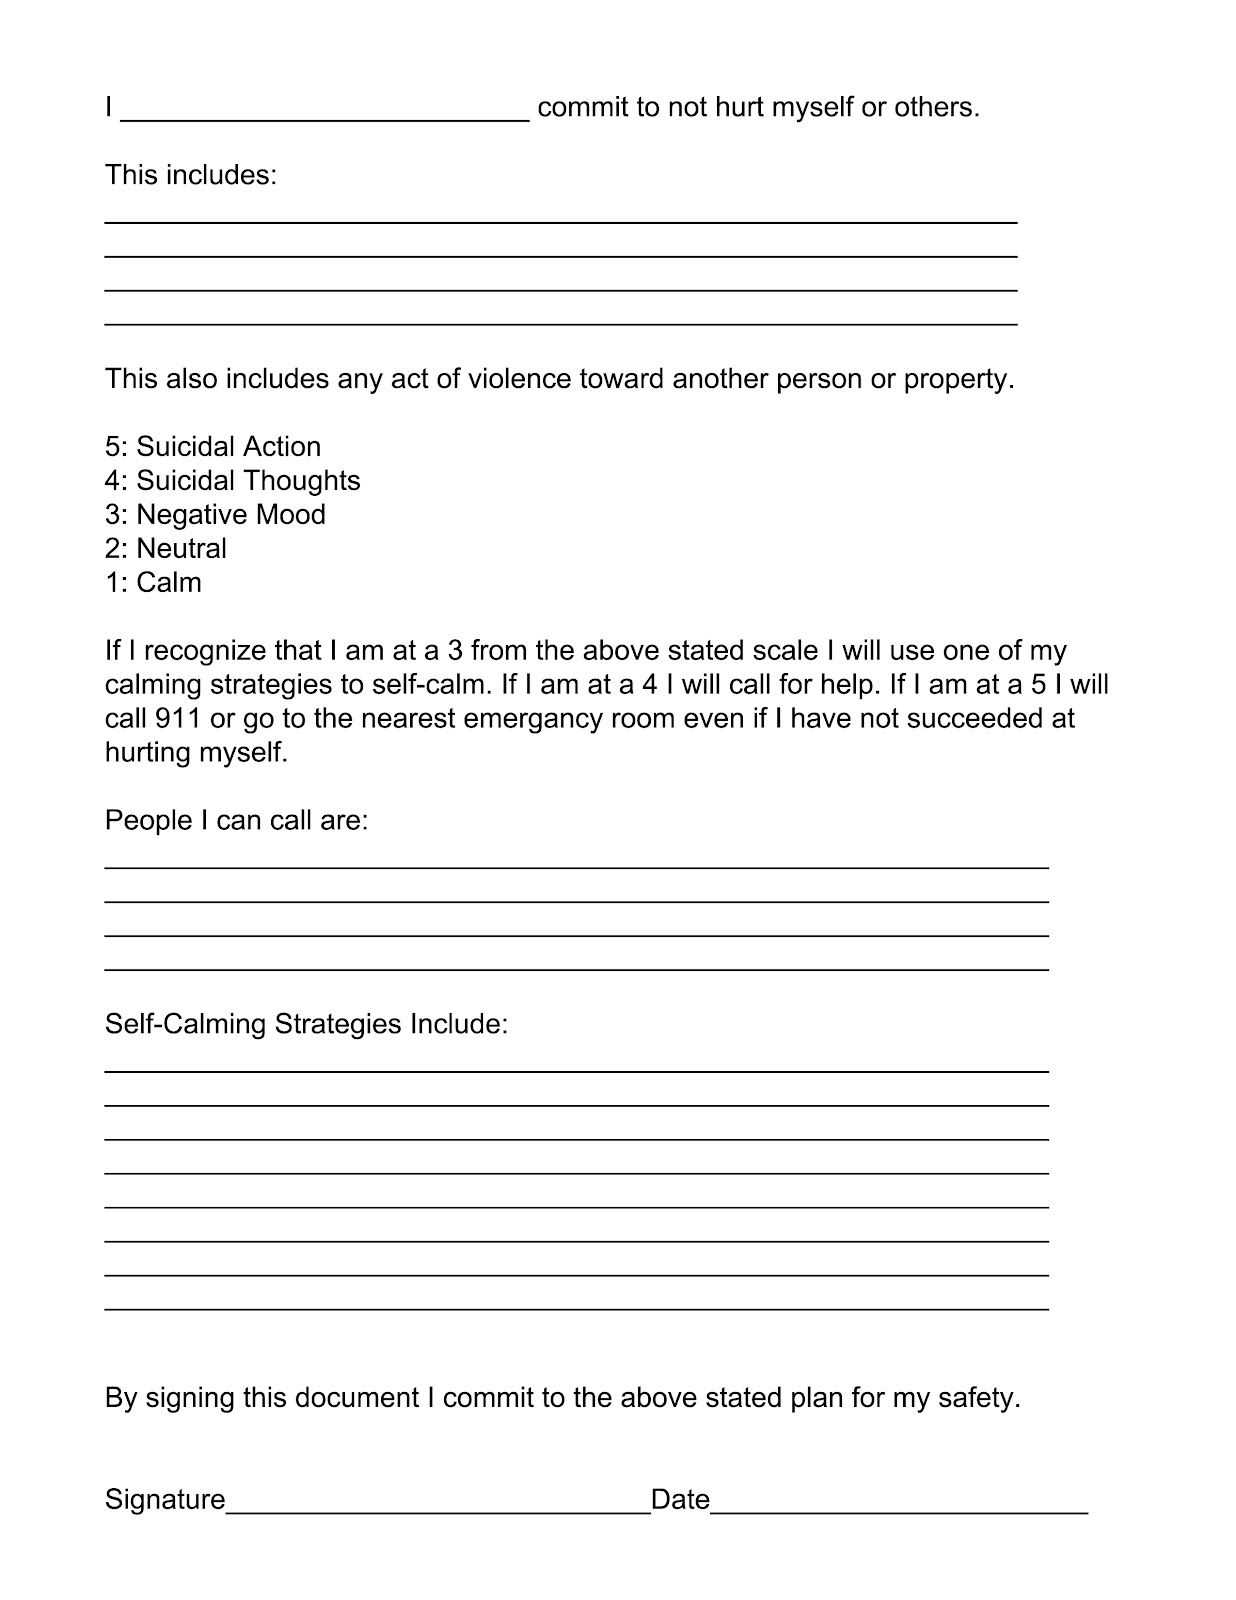 Division Of assets In Divorce Worksheet Along with Safety Plan for Suicidal or at Risk People